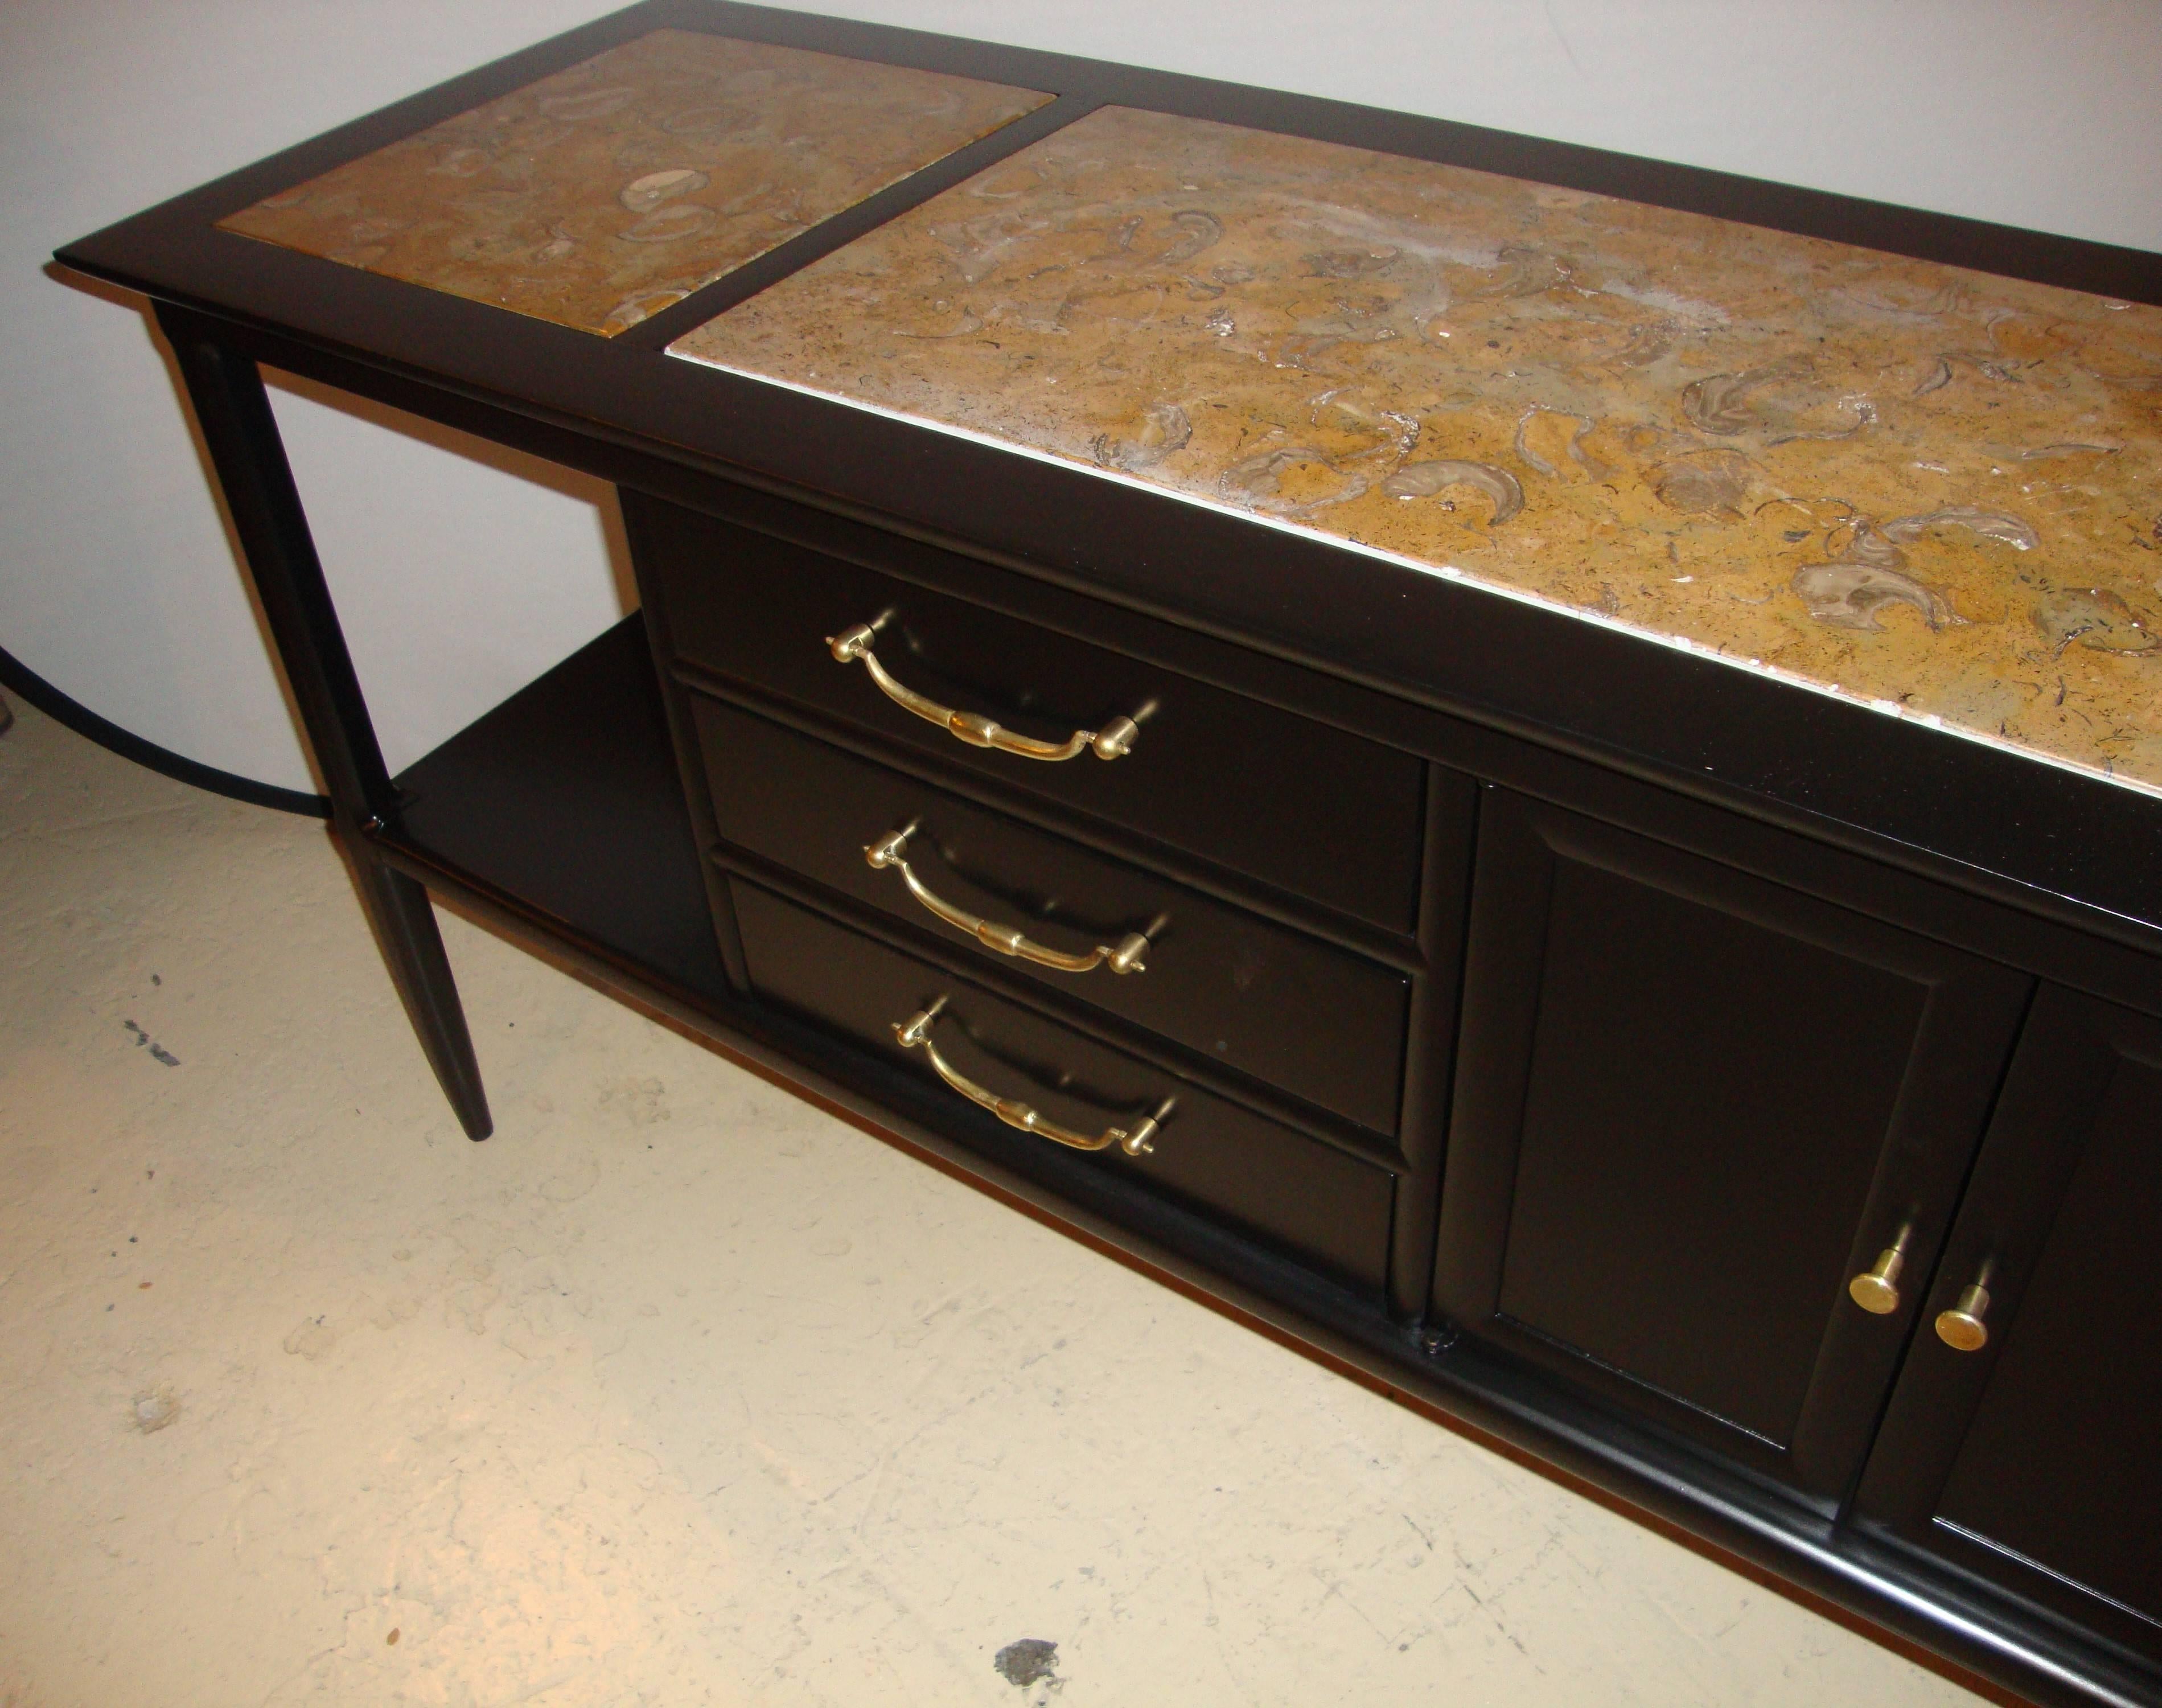 Pair of Tomlinson stamped marble-top ebonized credenzas or console tables. Each of custom quality having cultured marble insert tops supported by an ebony case having three center drawers flanked by side doors and open compartment areas. This pair